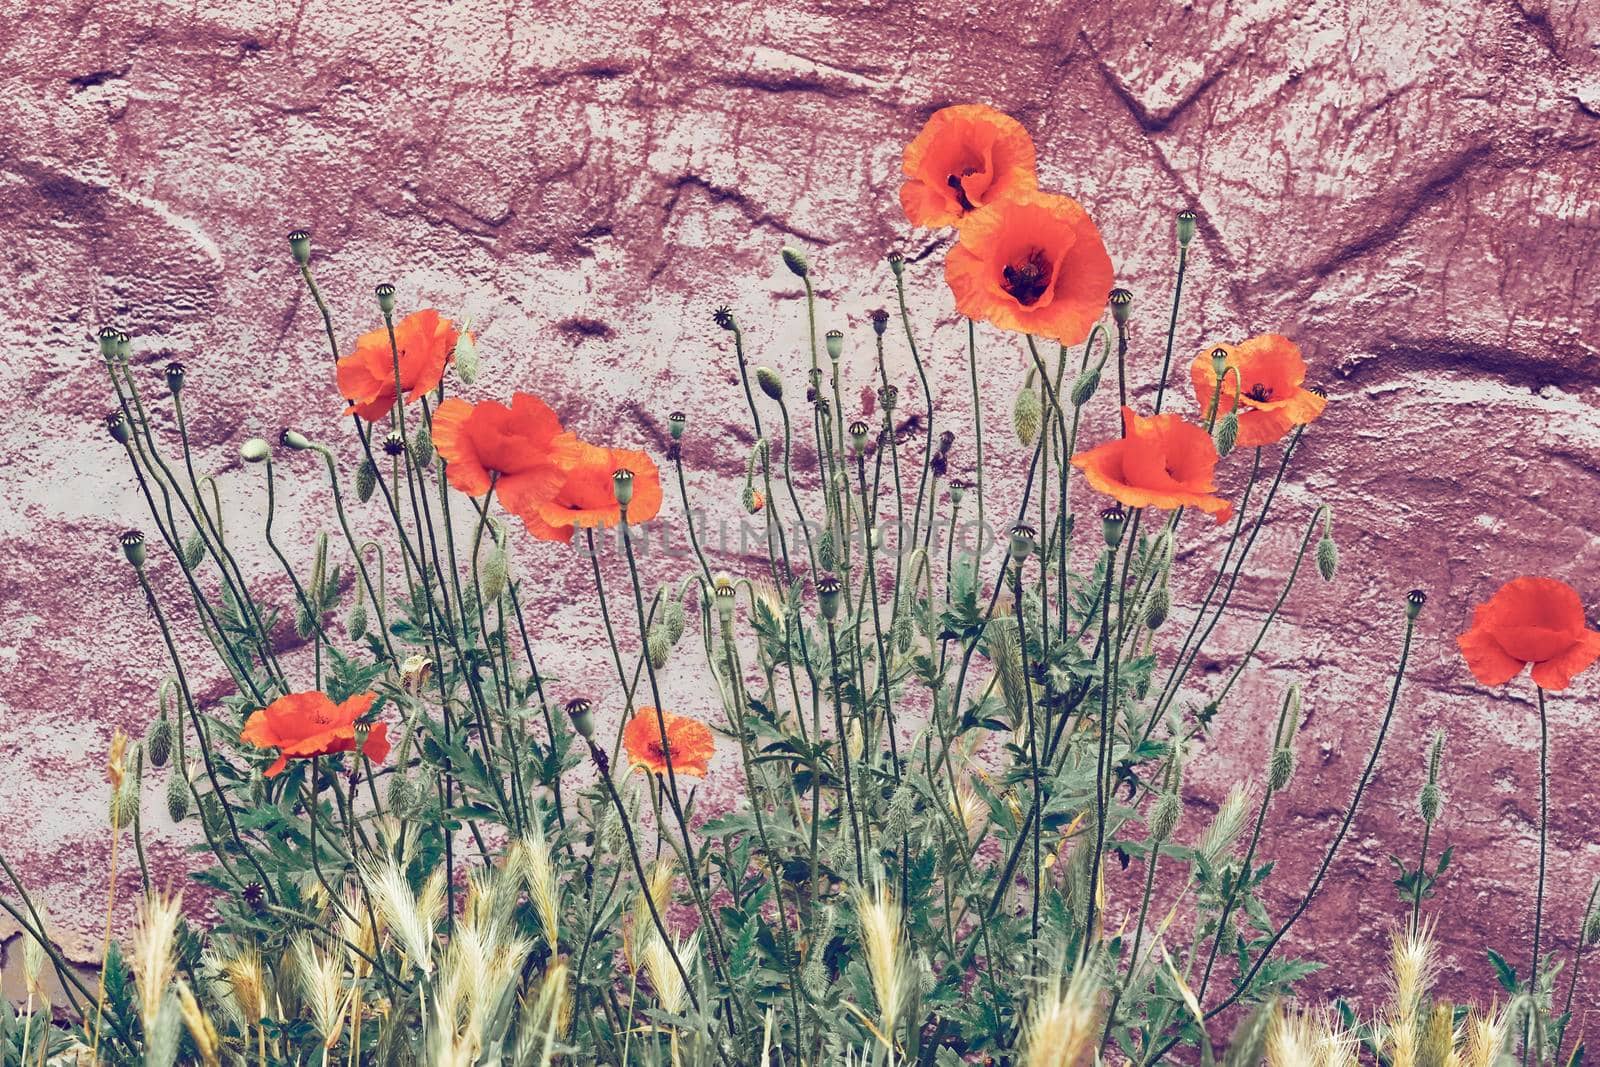 a herbaceous plant with showy flowers, milky sap, and rounded seed capsules. Many poppies contain alkaloids and are a source of drugs. Red tender scarlet poppies on a purple brown red ore background